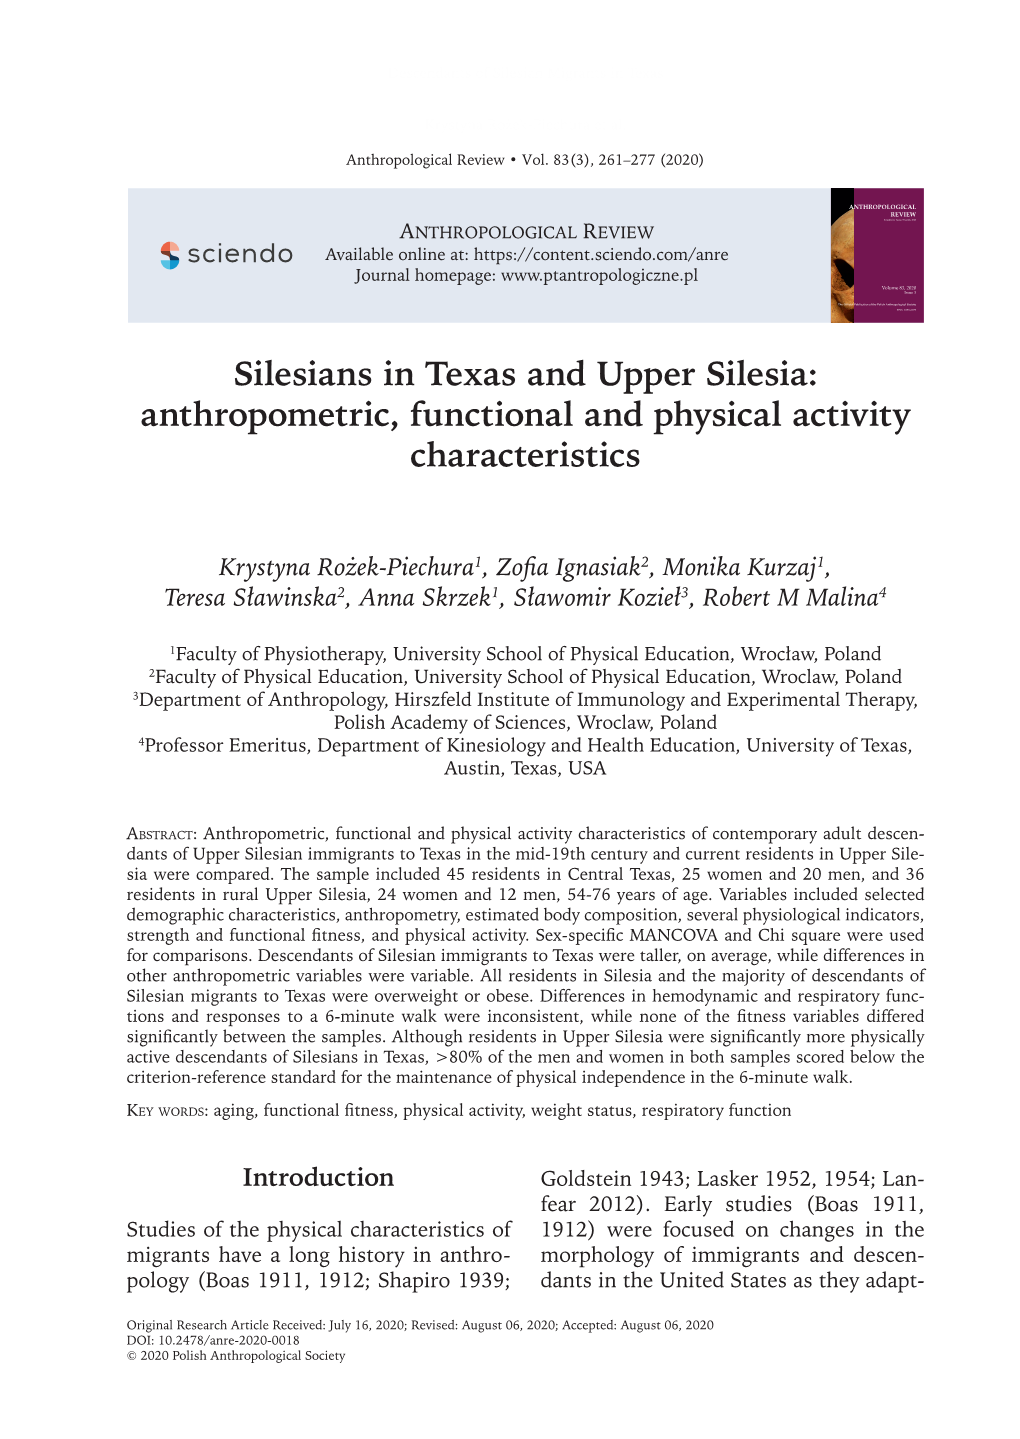 Silesians in Texas and Upper Silesia: Anthropometric, Functional and Physical Activity Characteristics